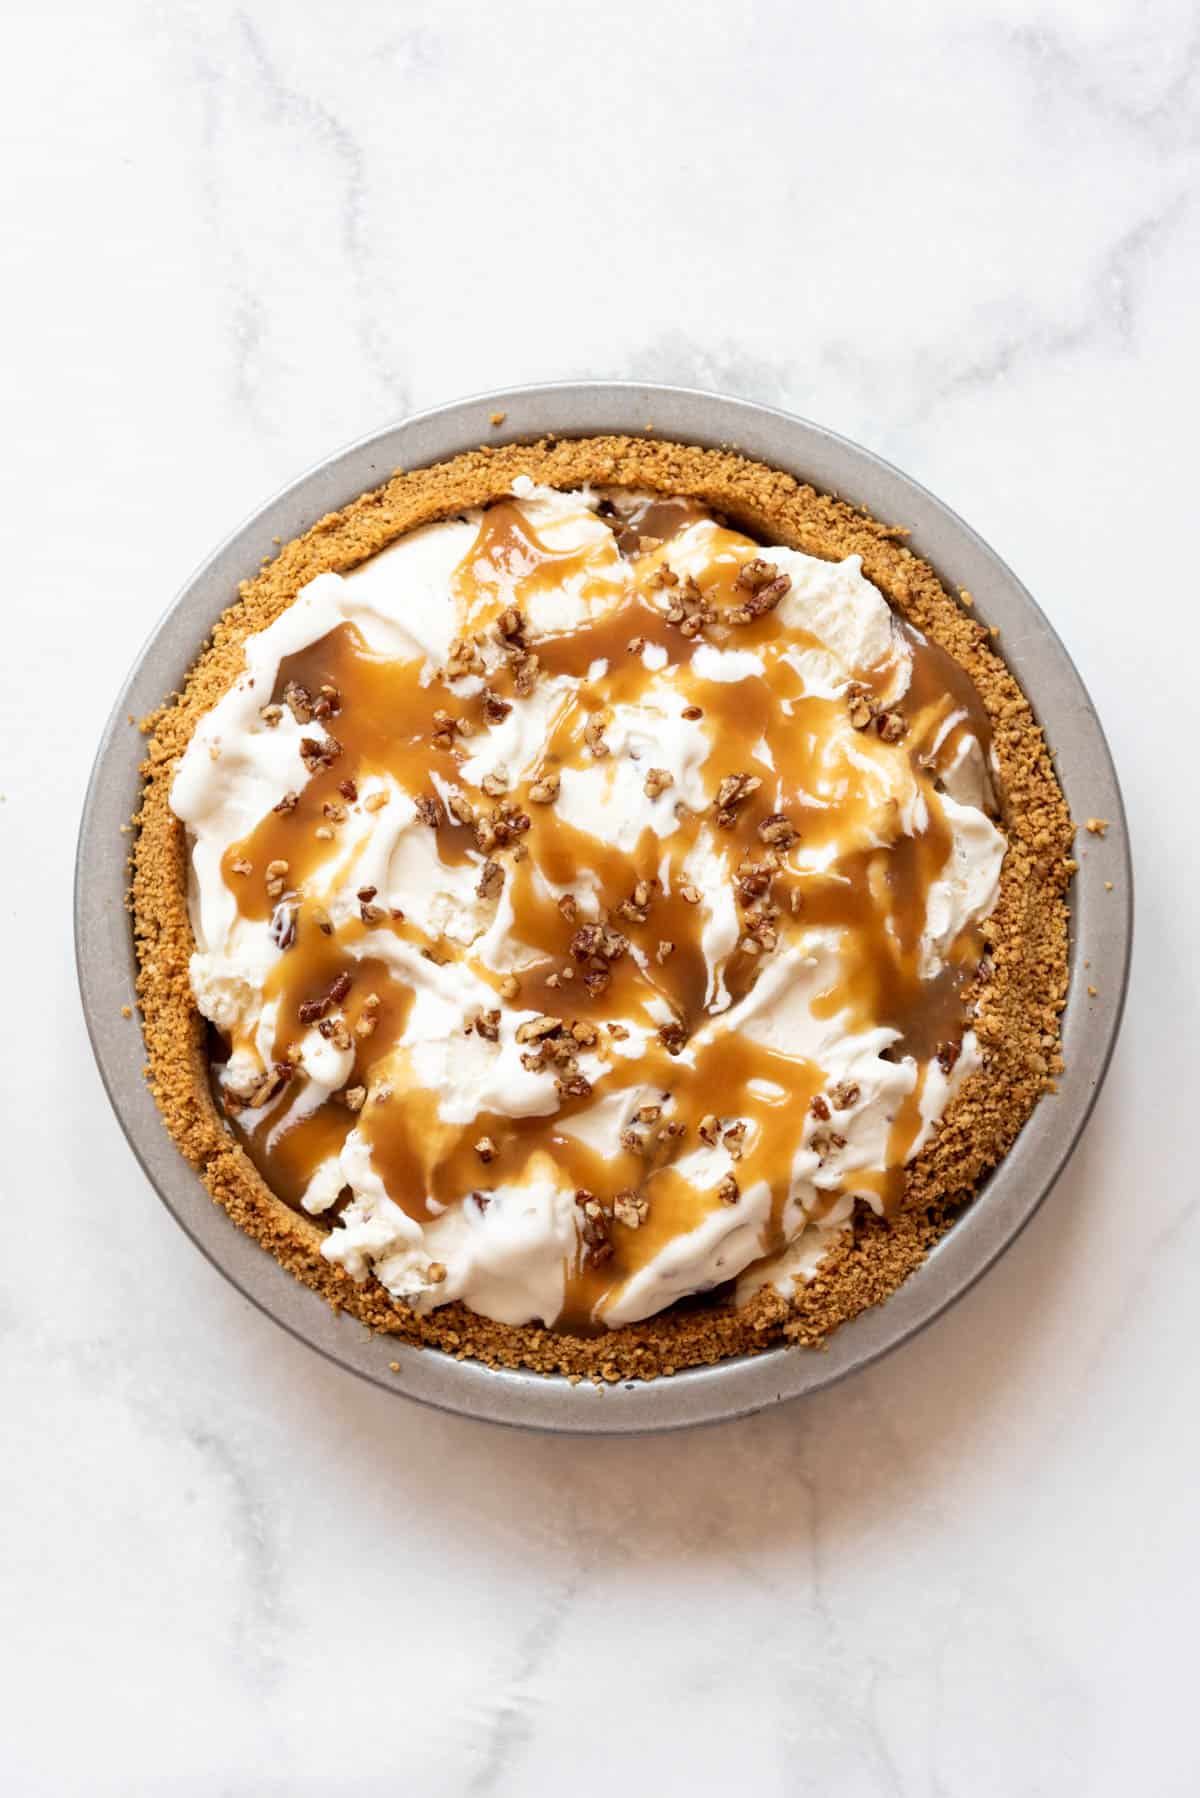 Butterscotch sauce and chopped pecans sprinkled over a frozen ice cream pie.